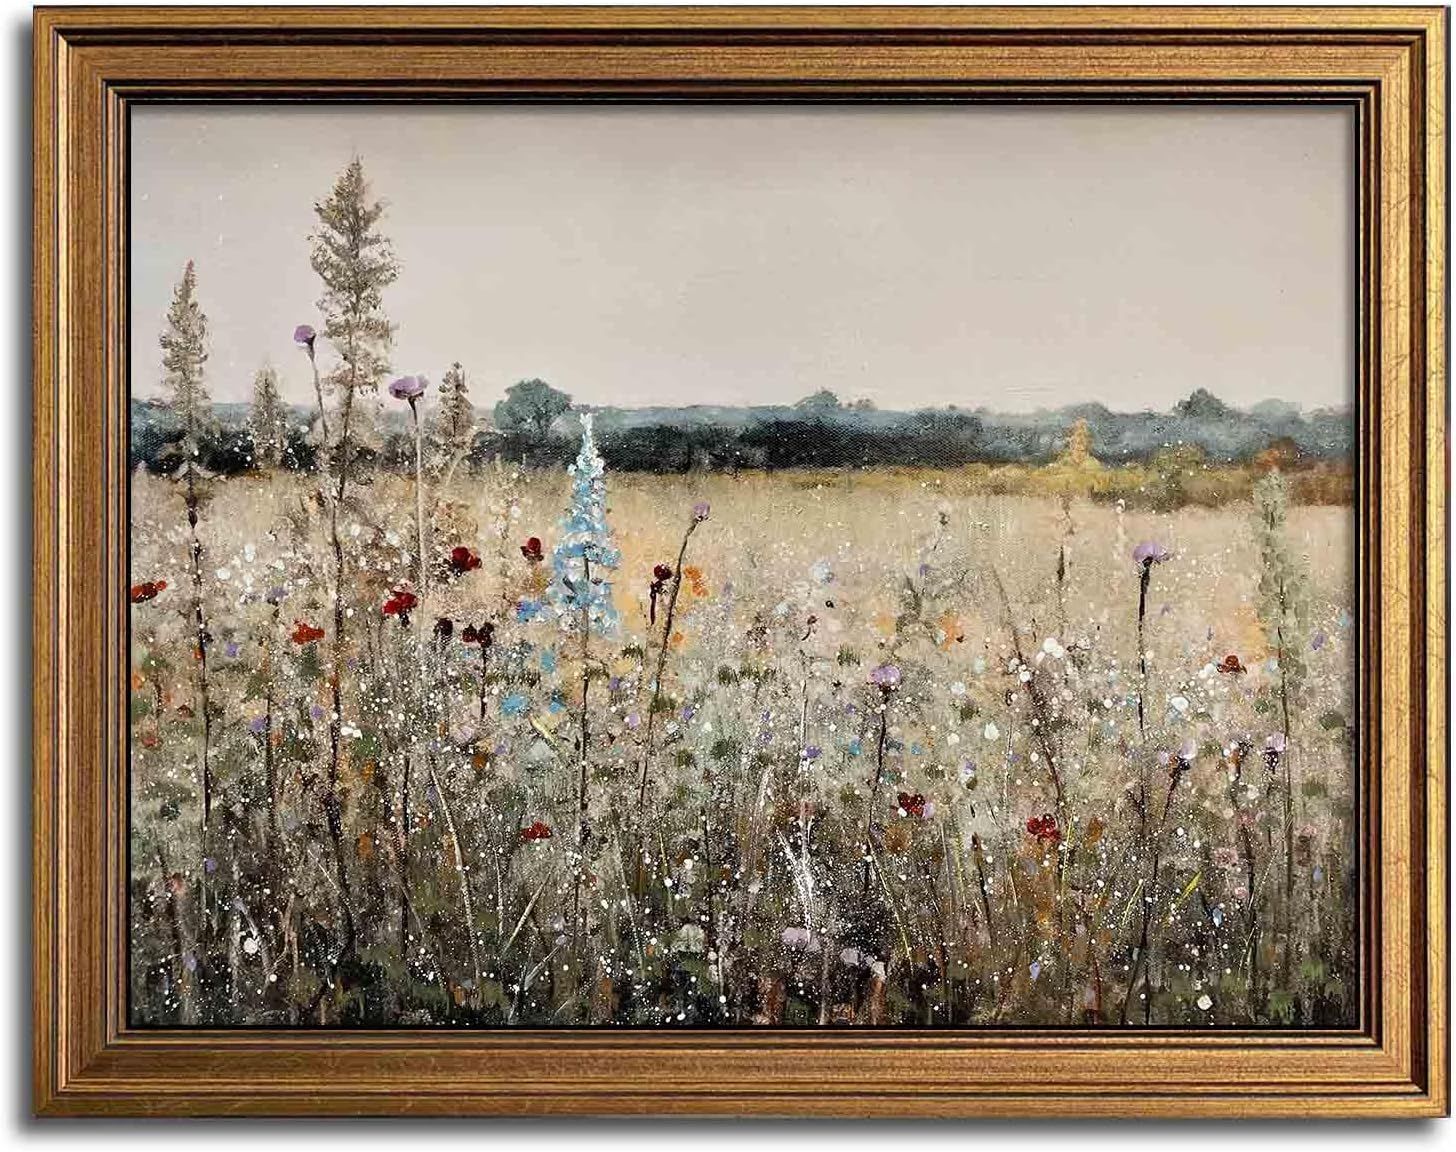 Gold Framed Vintage Wall Art Classical French Landscape Wildflowers Botanical Painting Canvas Pri... | Amazon (US)